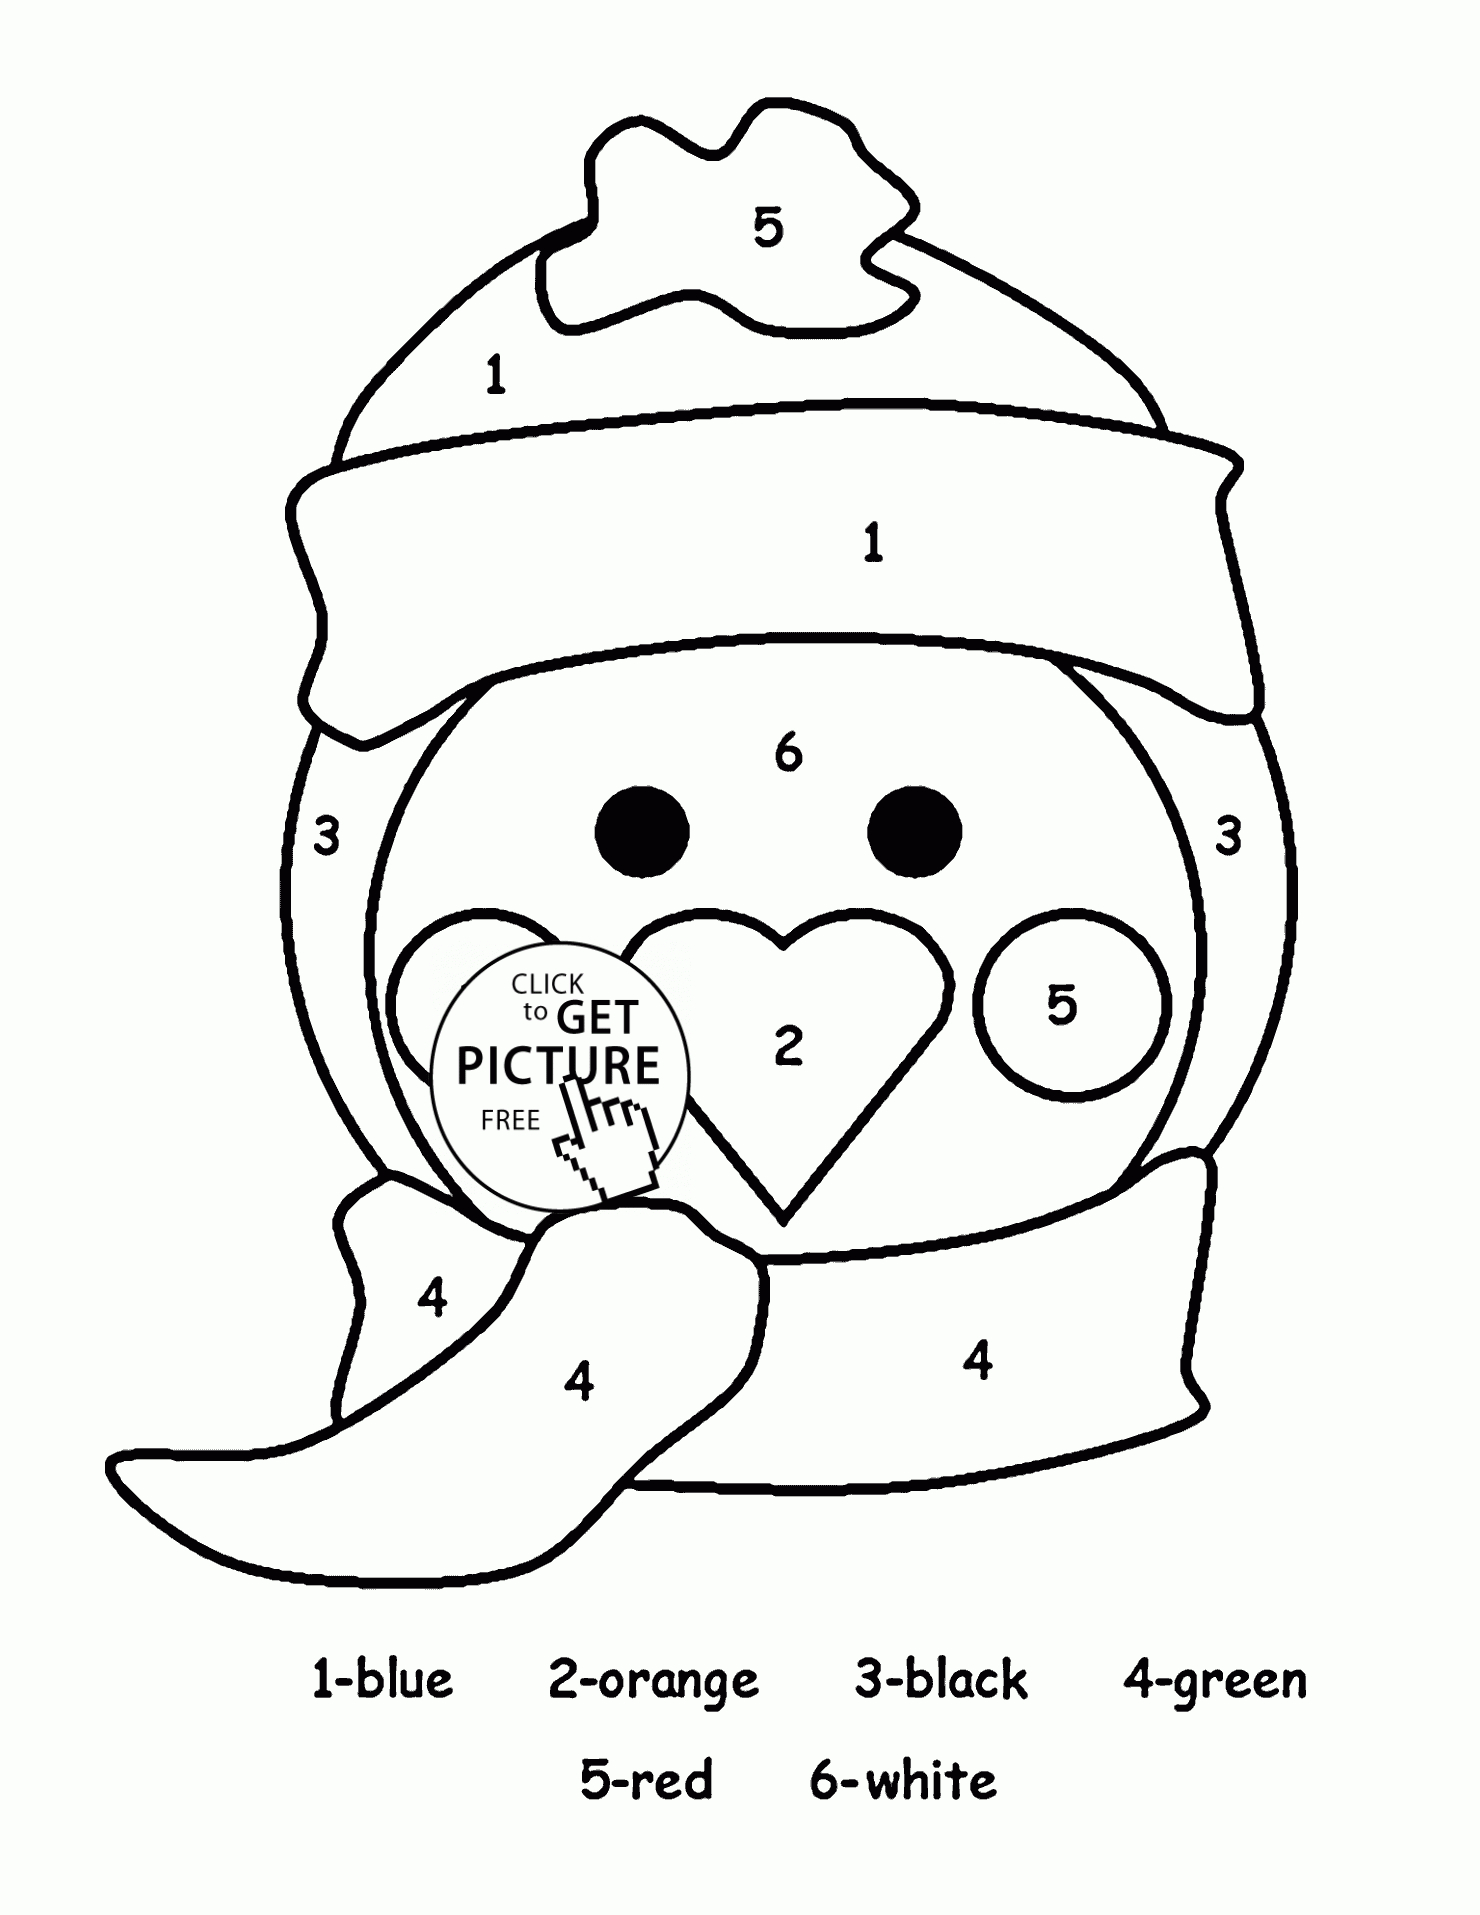 Colornumber Cute Penguin Coloring Page For Kids, Education - Free Preschool Coloring Sheets Printables